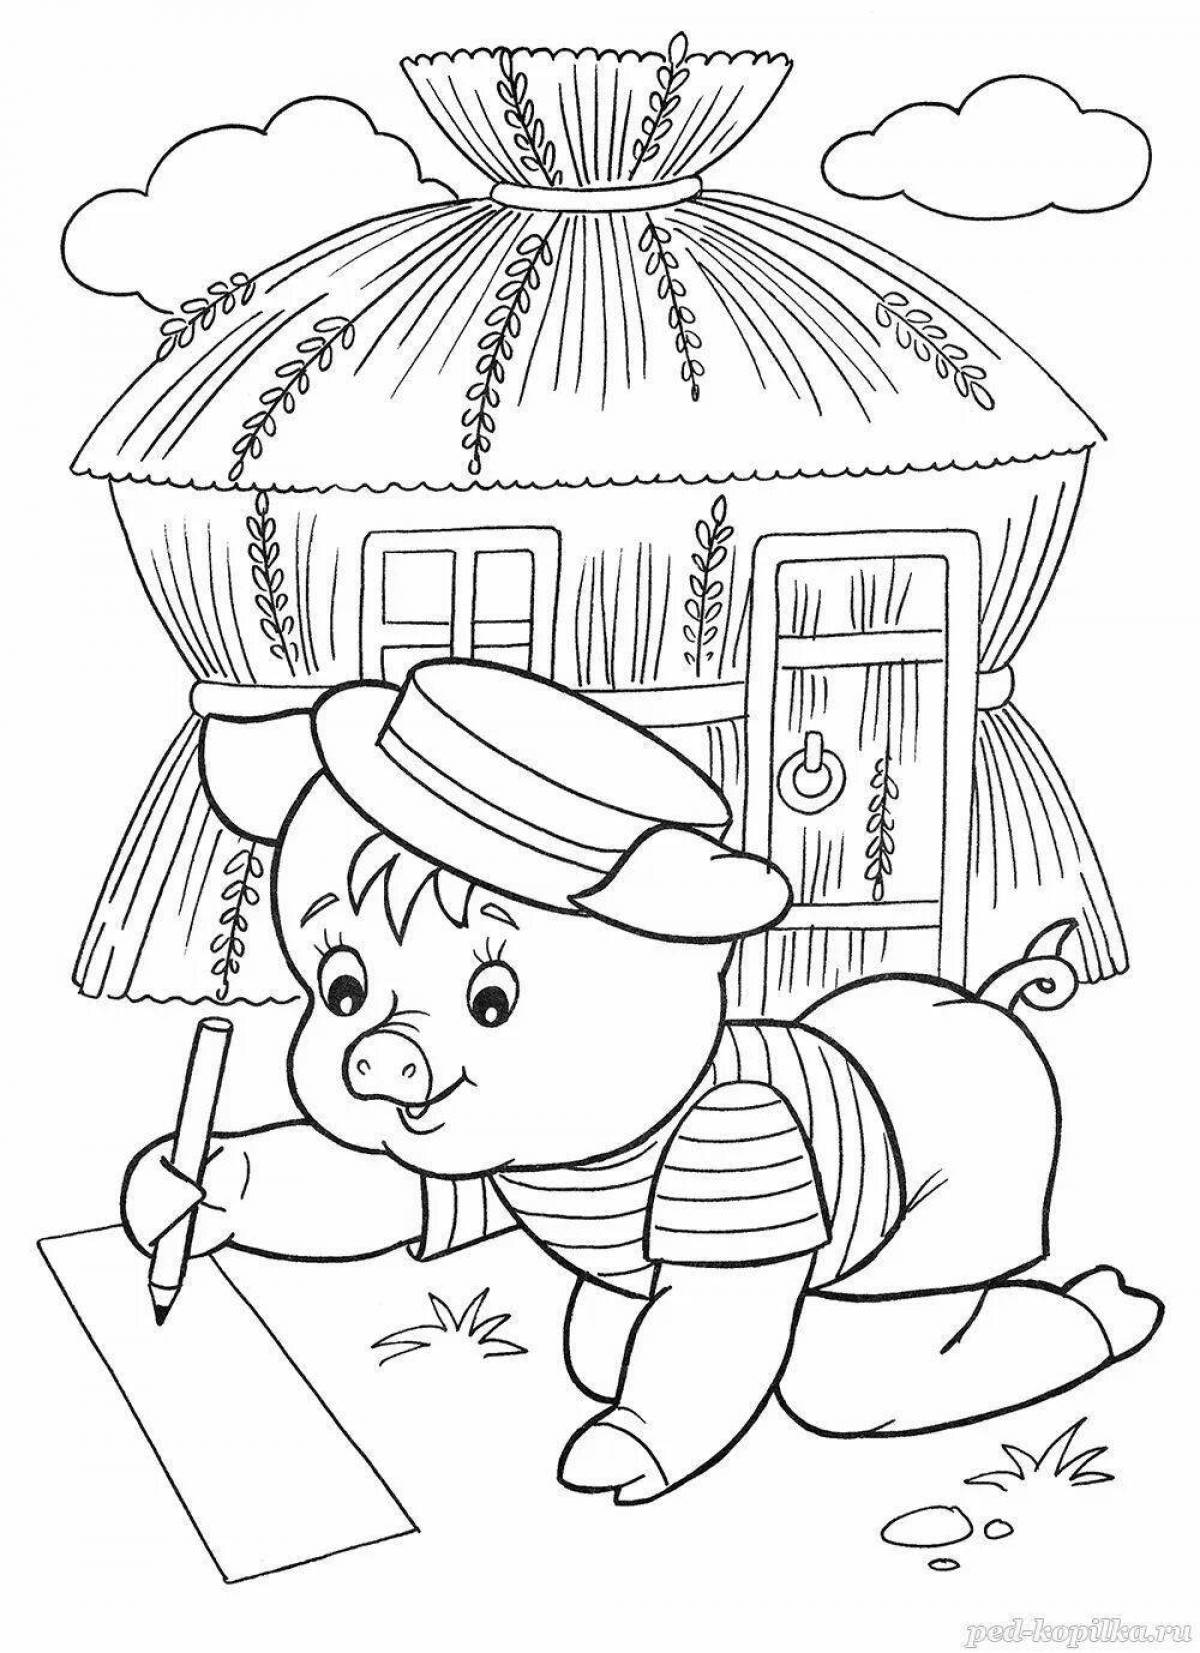 Animated coloring book visiting a fairy tale 4-5 years old middle group